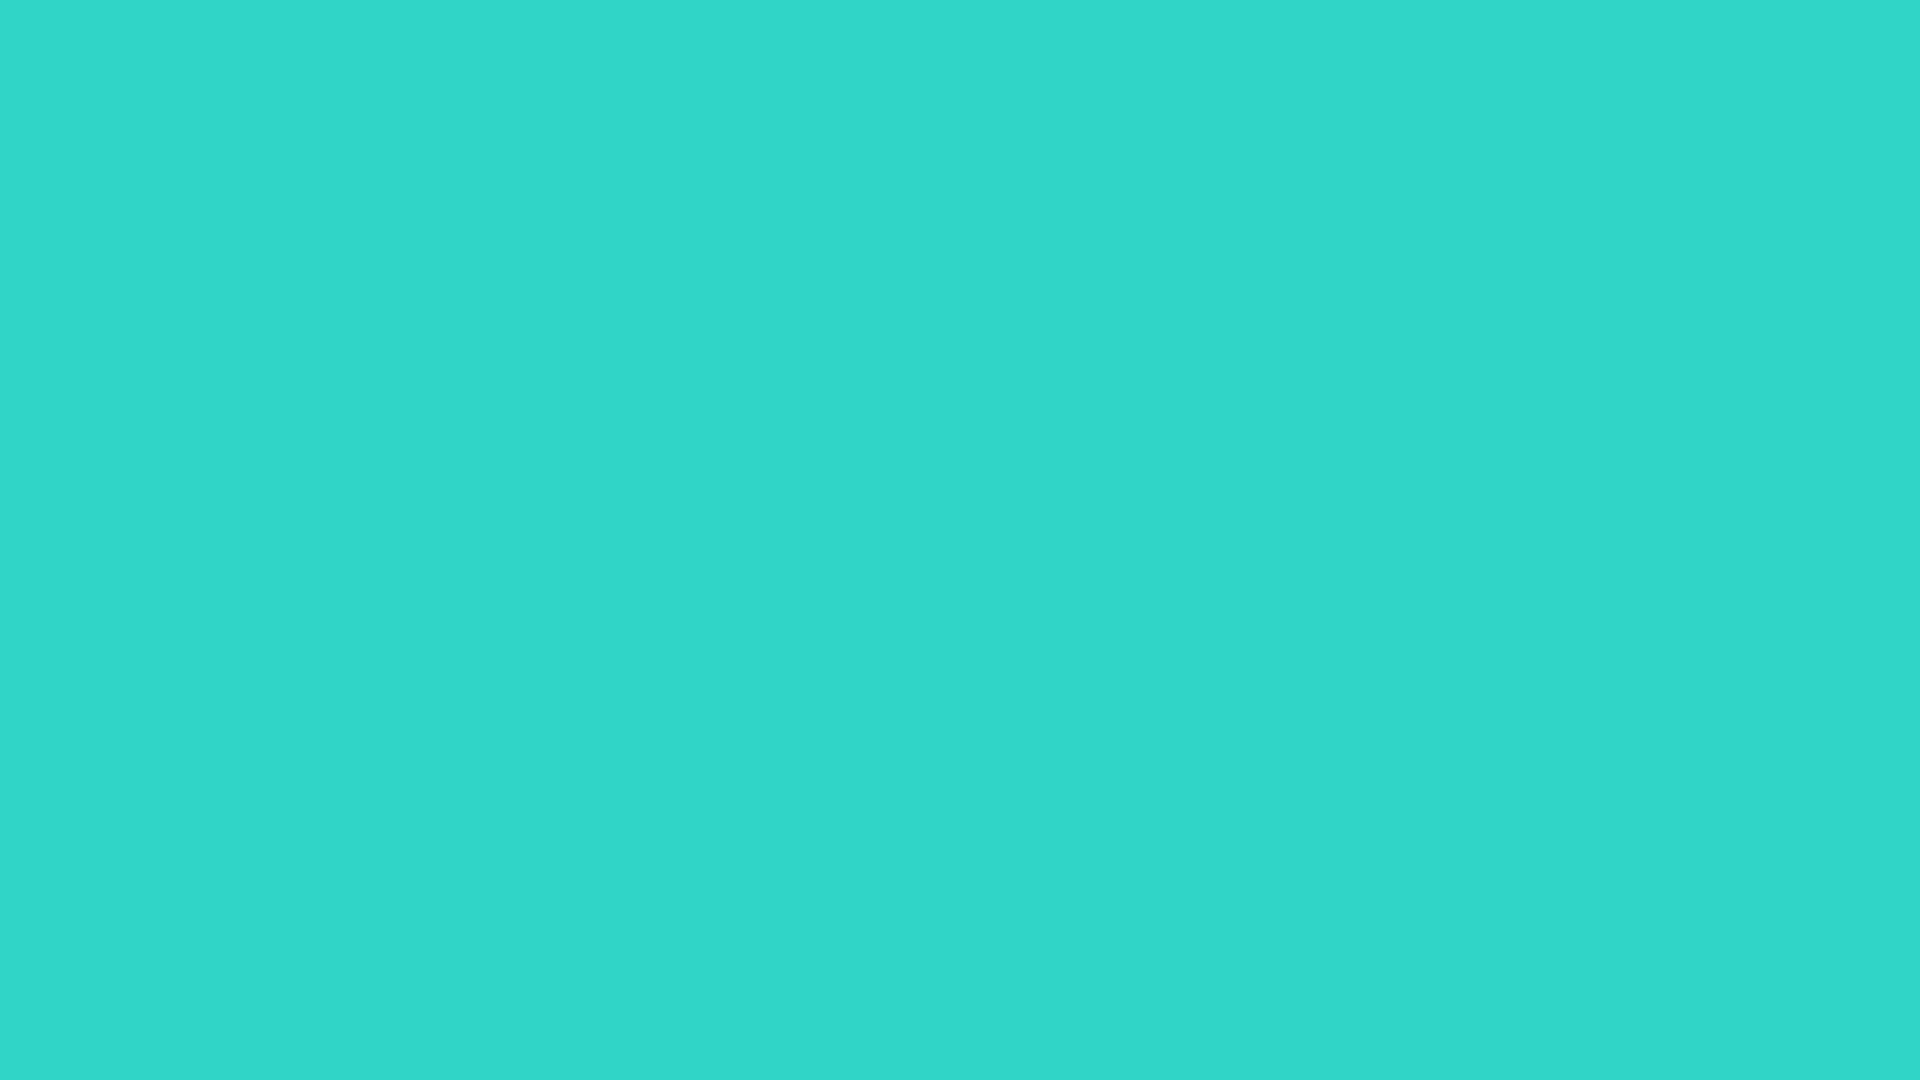 Turquoise   Wallpaper High Definition High Quality Widescreen 1920x1080